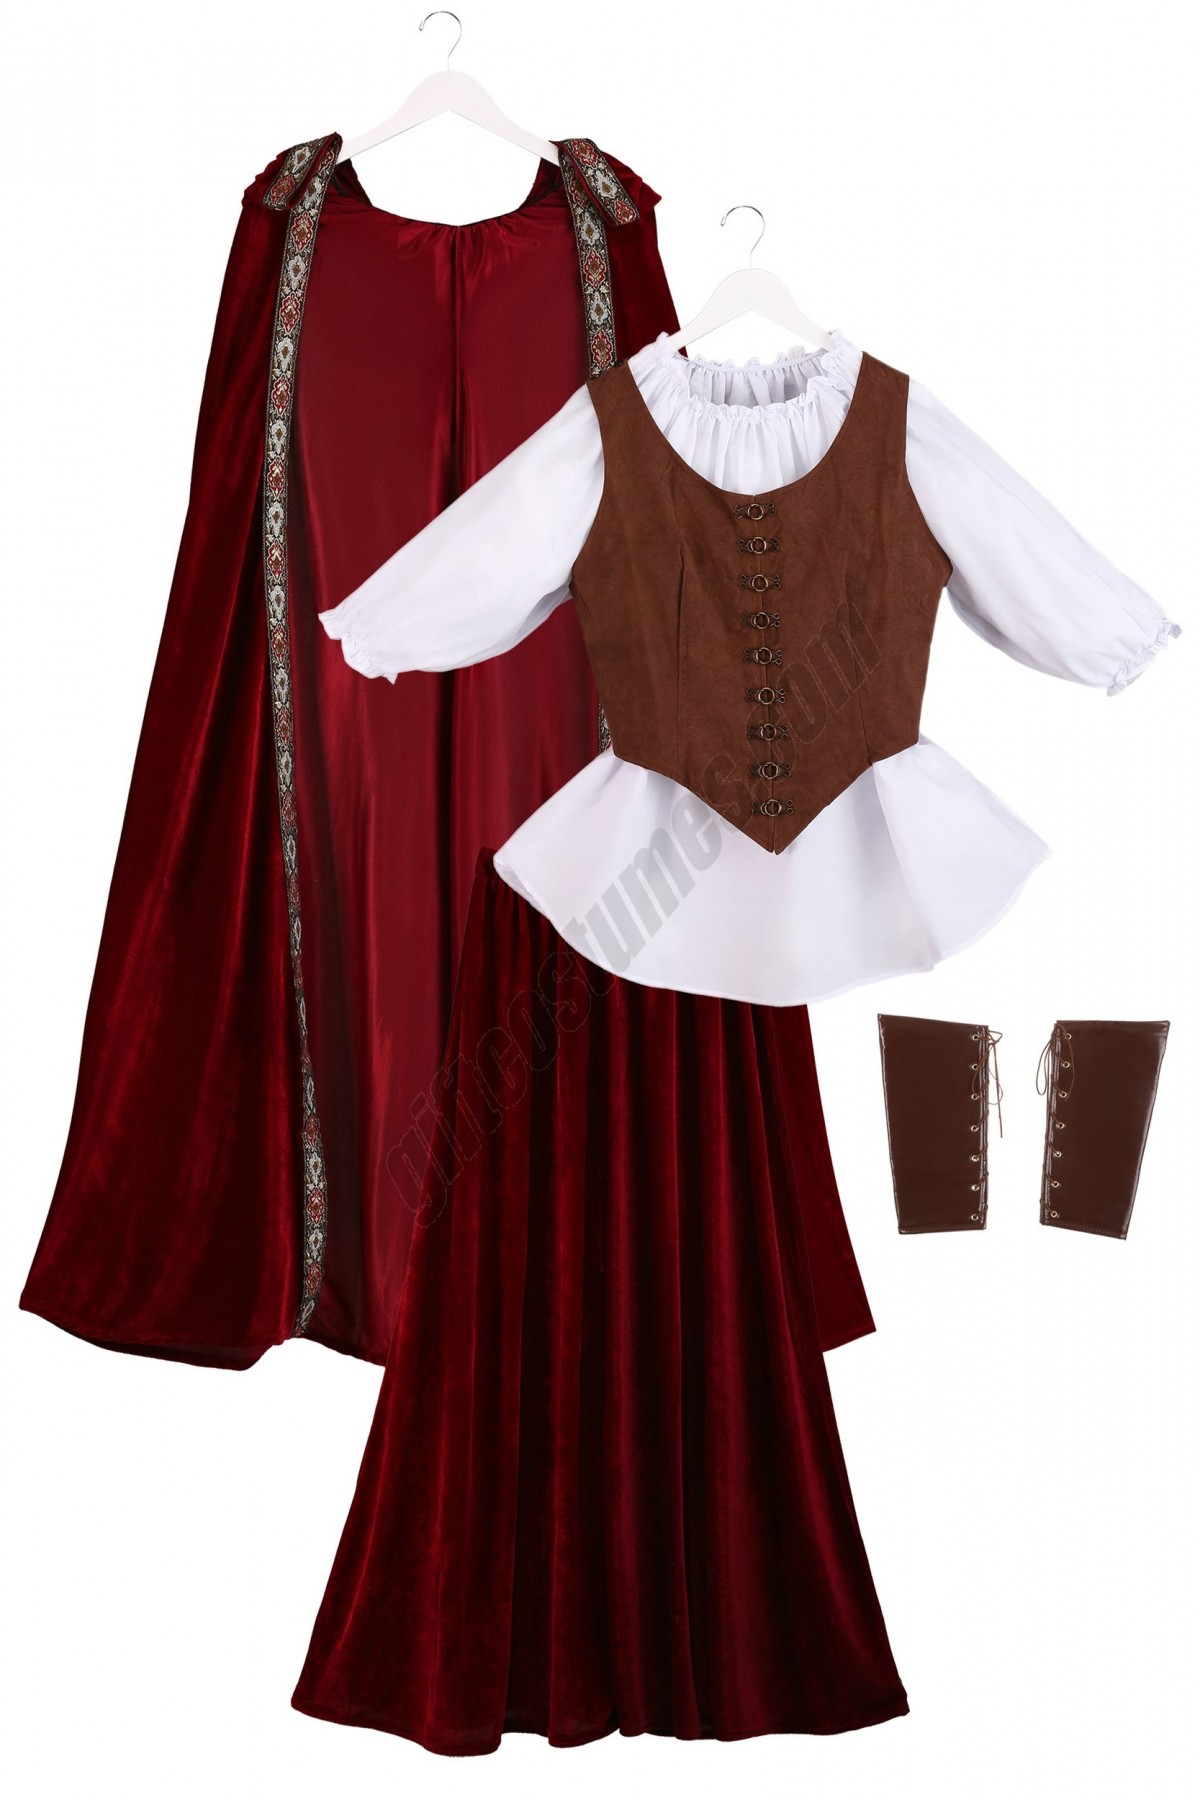 Deluxe Red Riding Hood Plus Size Costume Promotions - -10